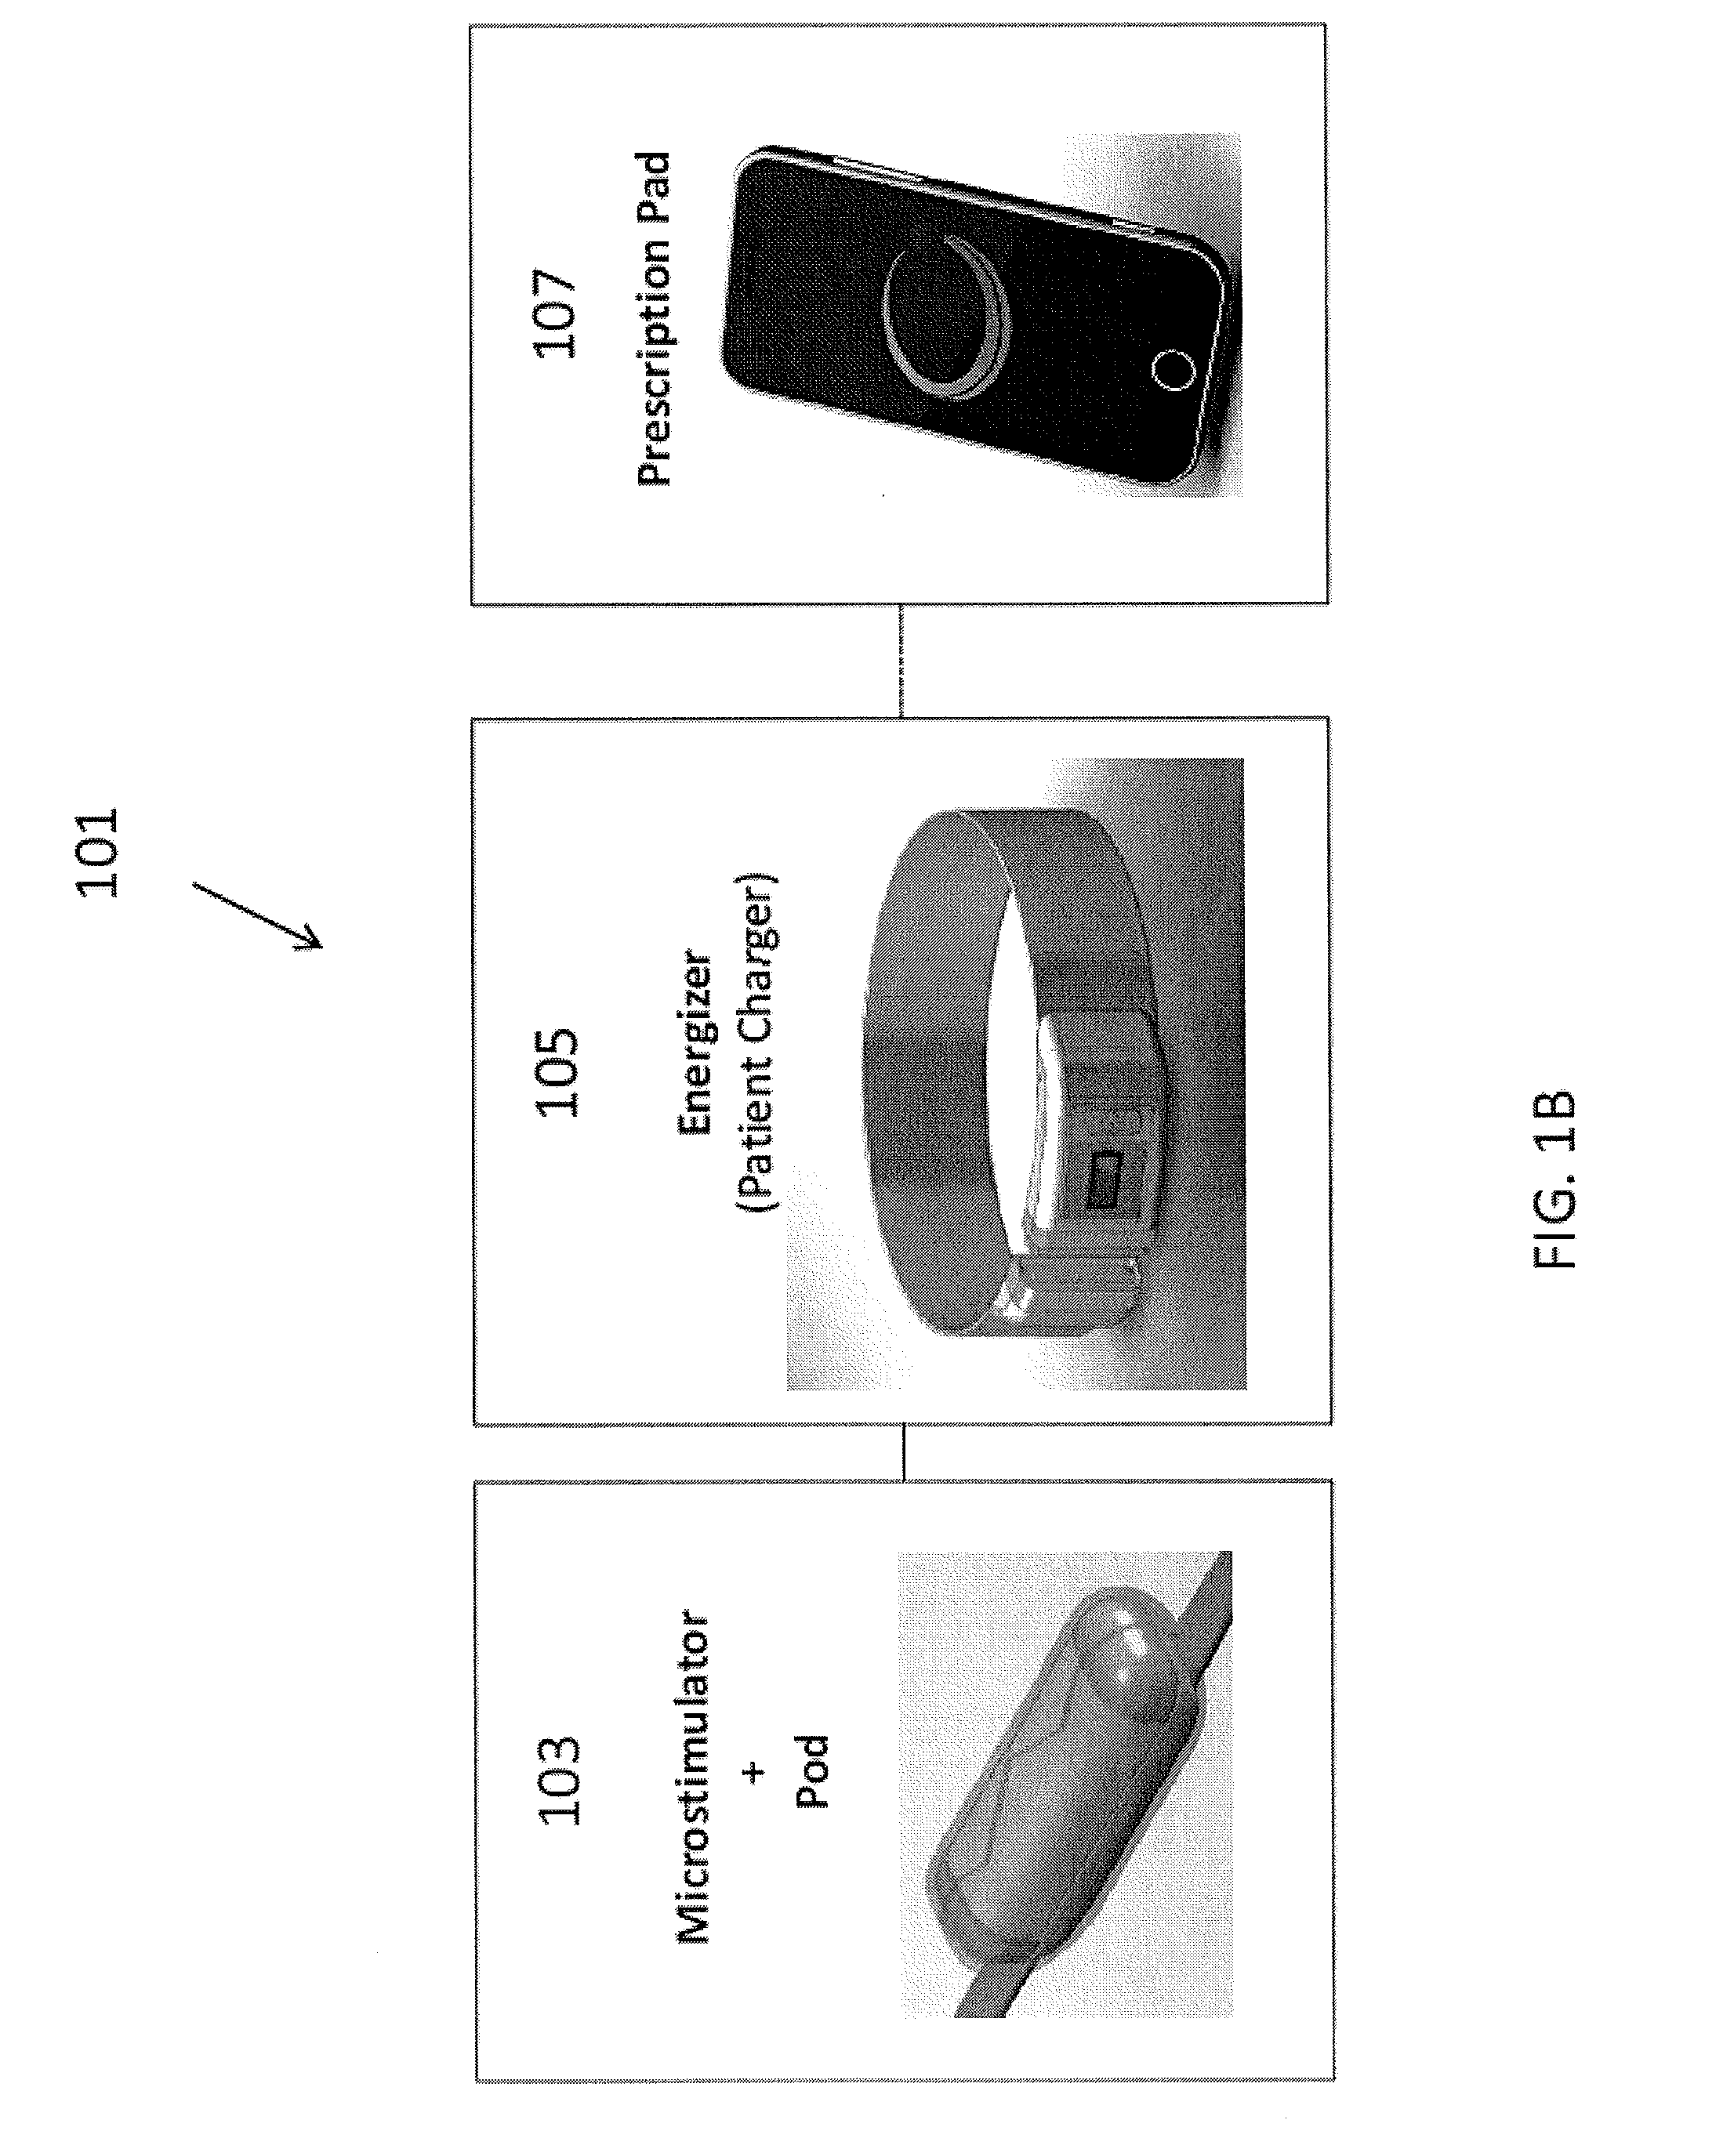 Systems and methods for stimulating and/or monitoring loci in the brain to treat inflammation and to enhance vagus nerve stimulation